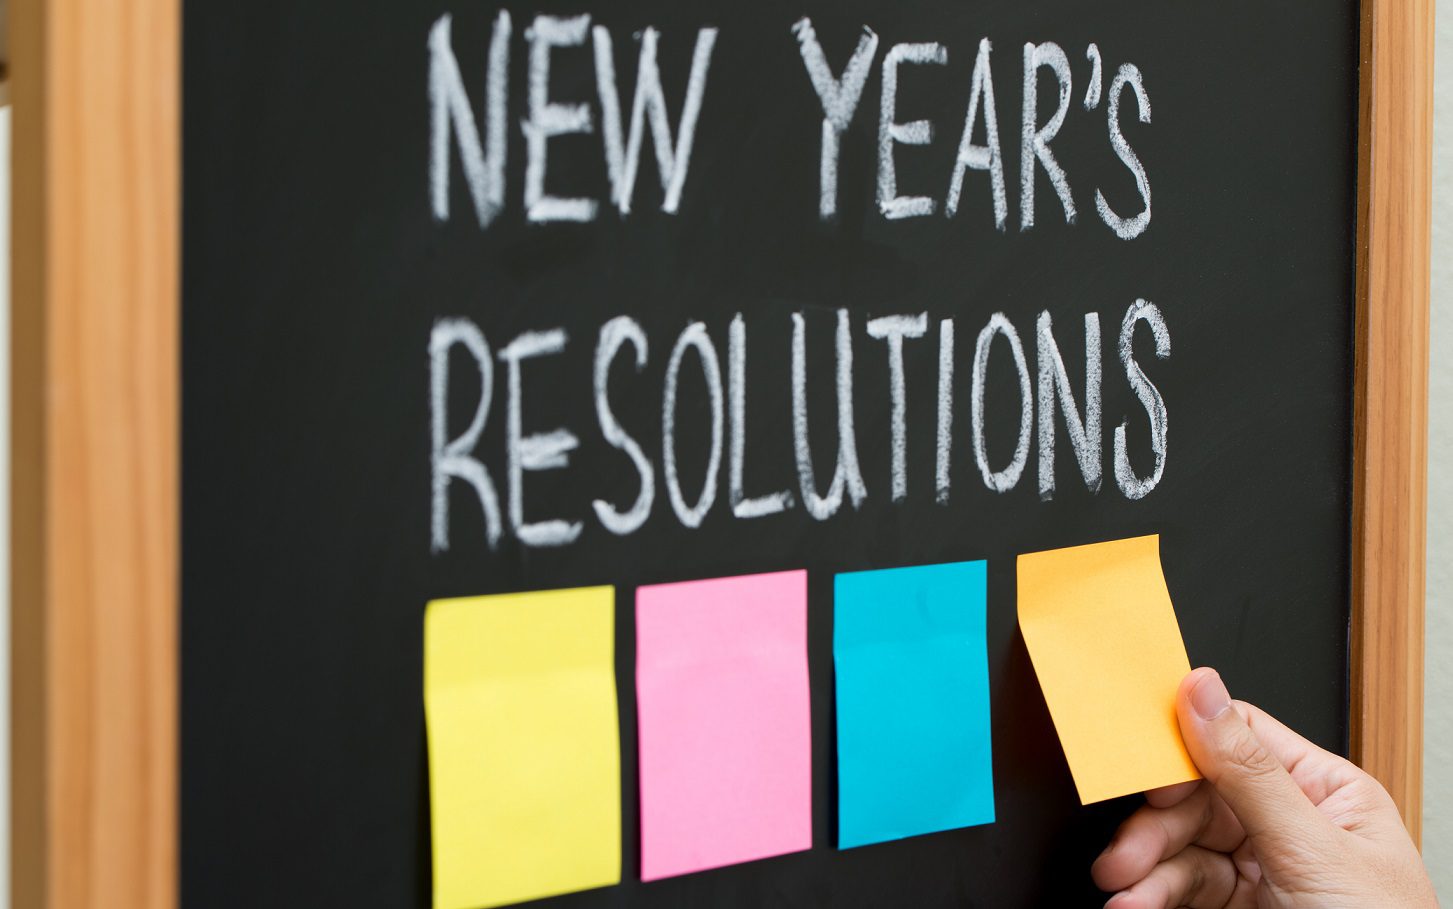 New Year's resolutions on a chalkboard